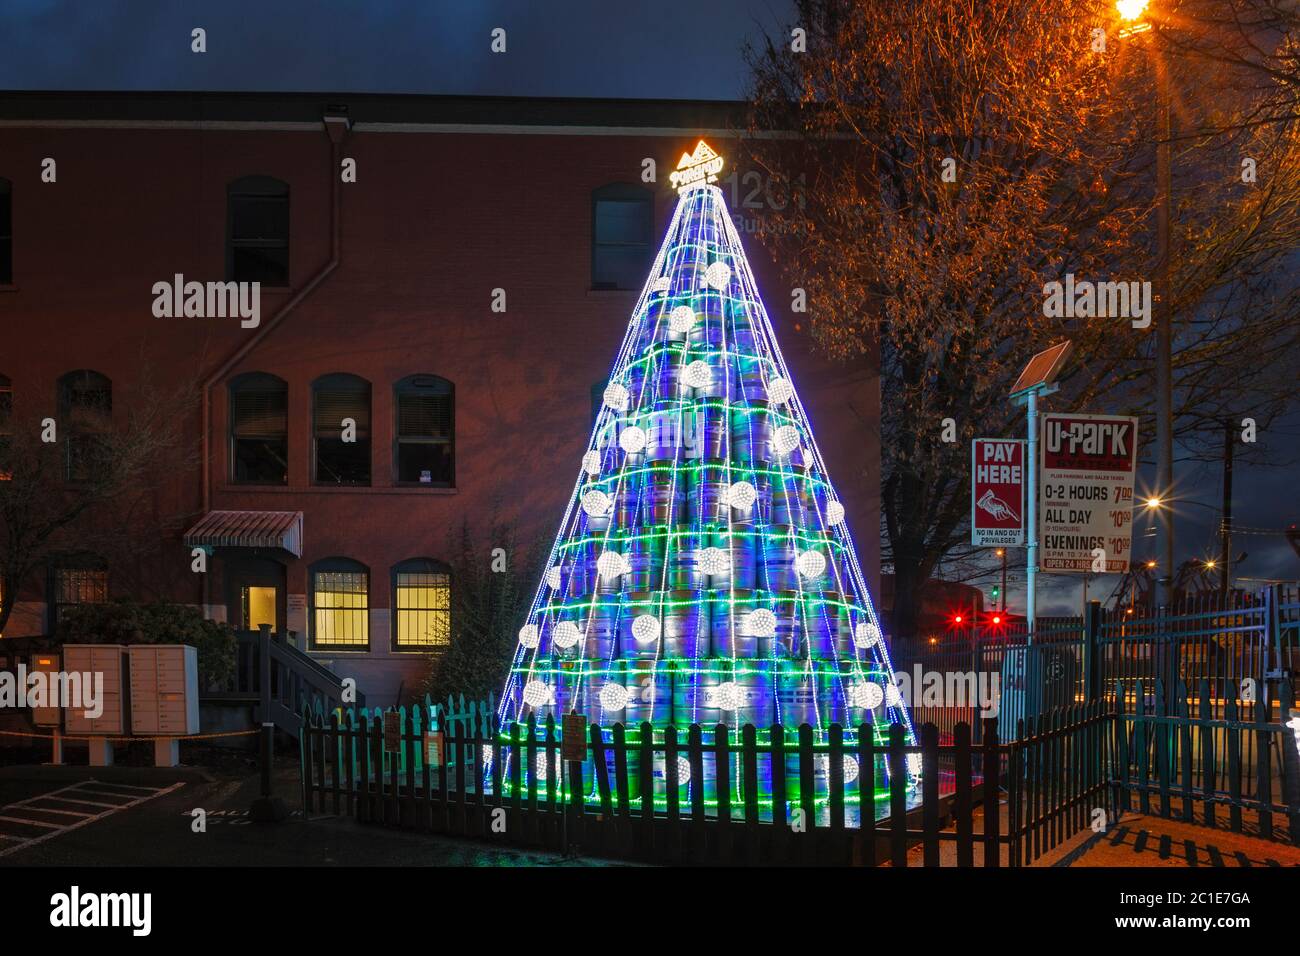 WA16781-00...WASHINGTON - A seasonally decorated tree created by beer kegs at the Pyramid Brewing Company located in Seattle's Stadium District. Stock Photo